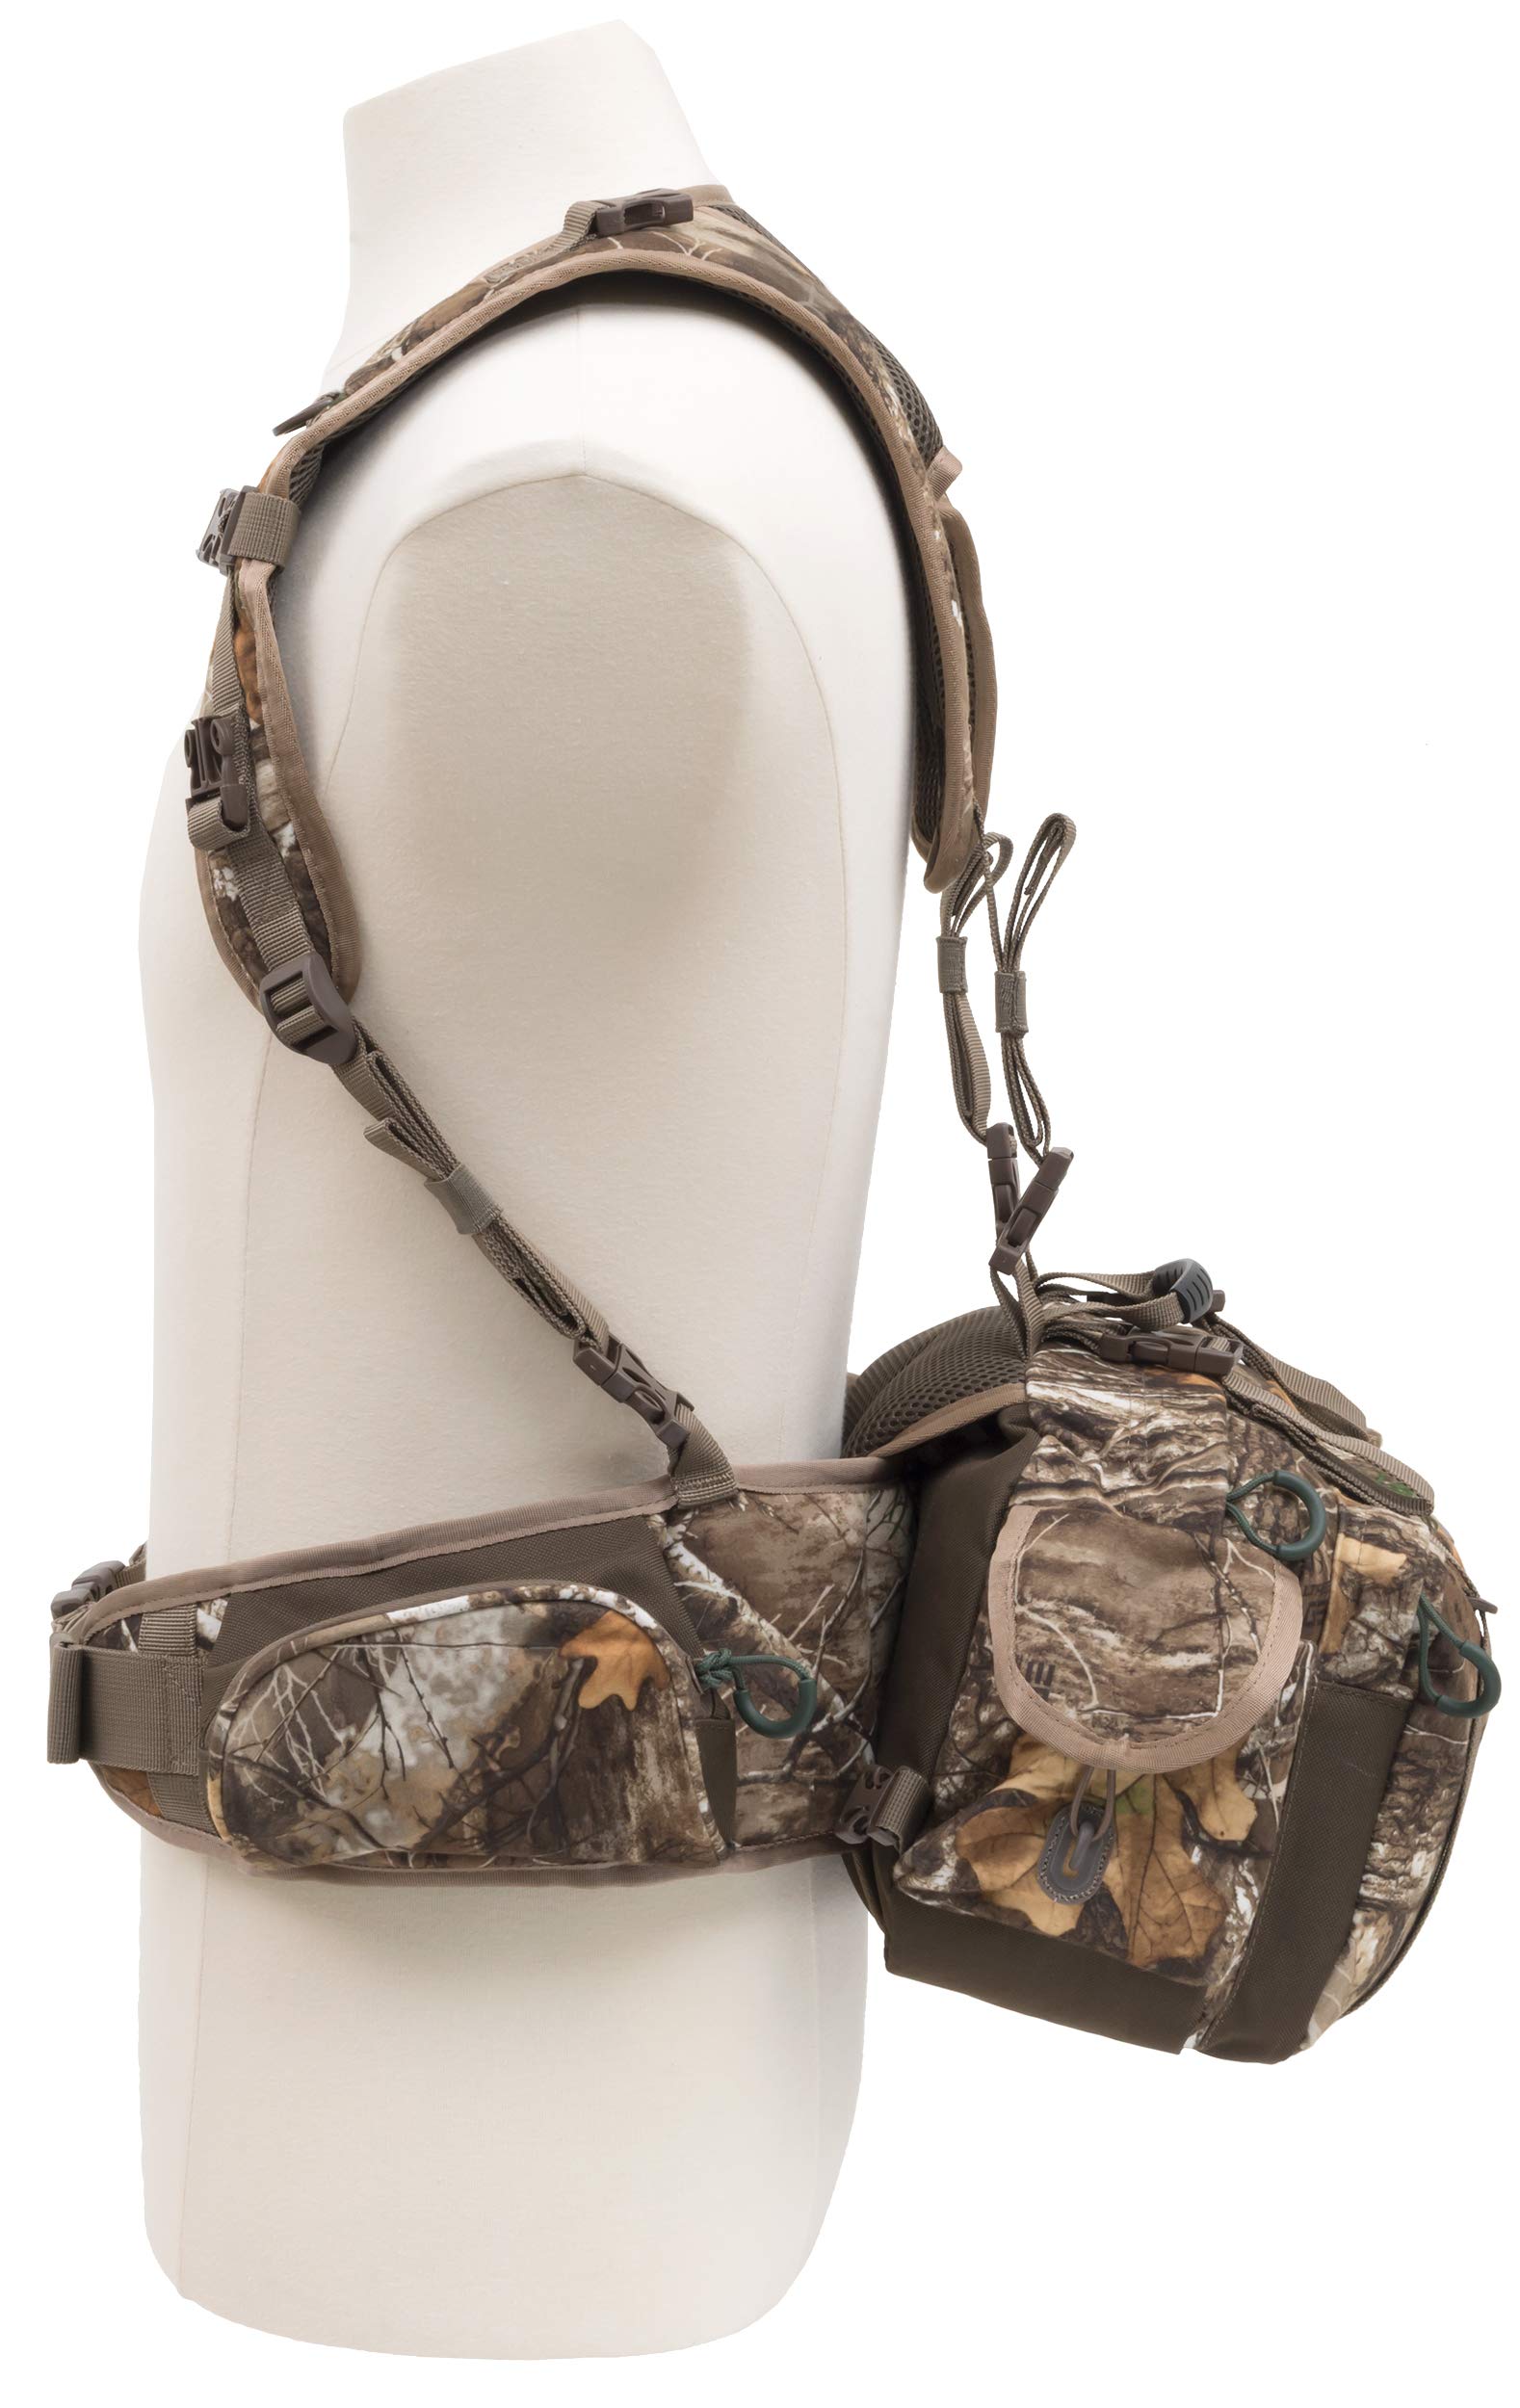 ALPS OutdoorZ Little Bear Hunting Pack